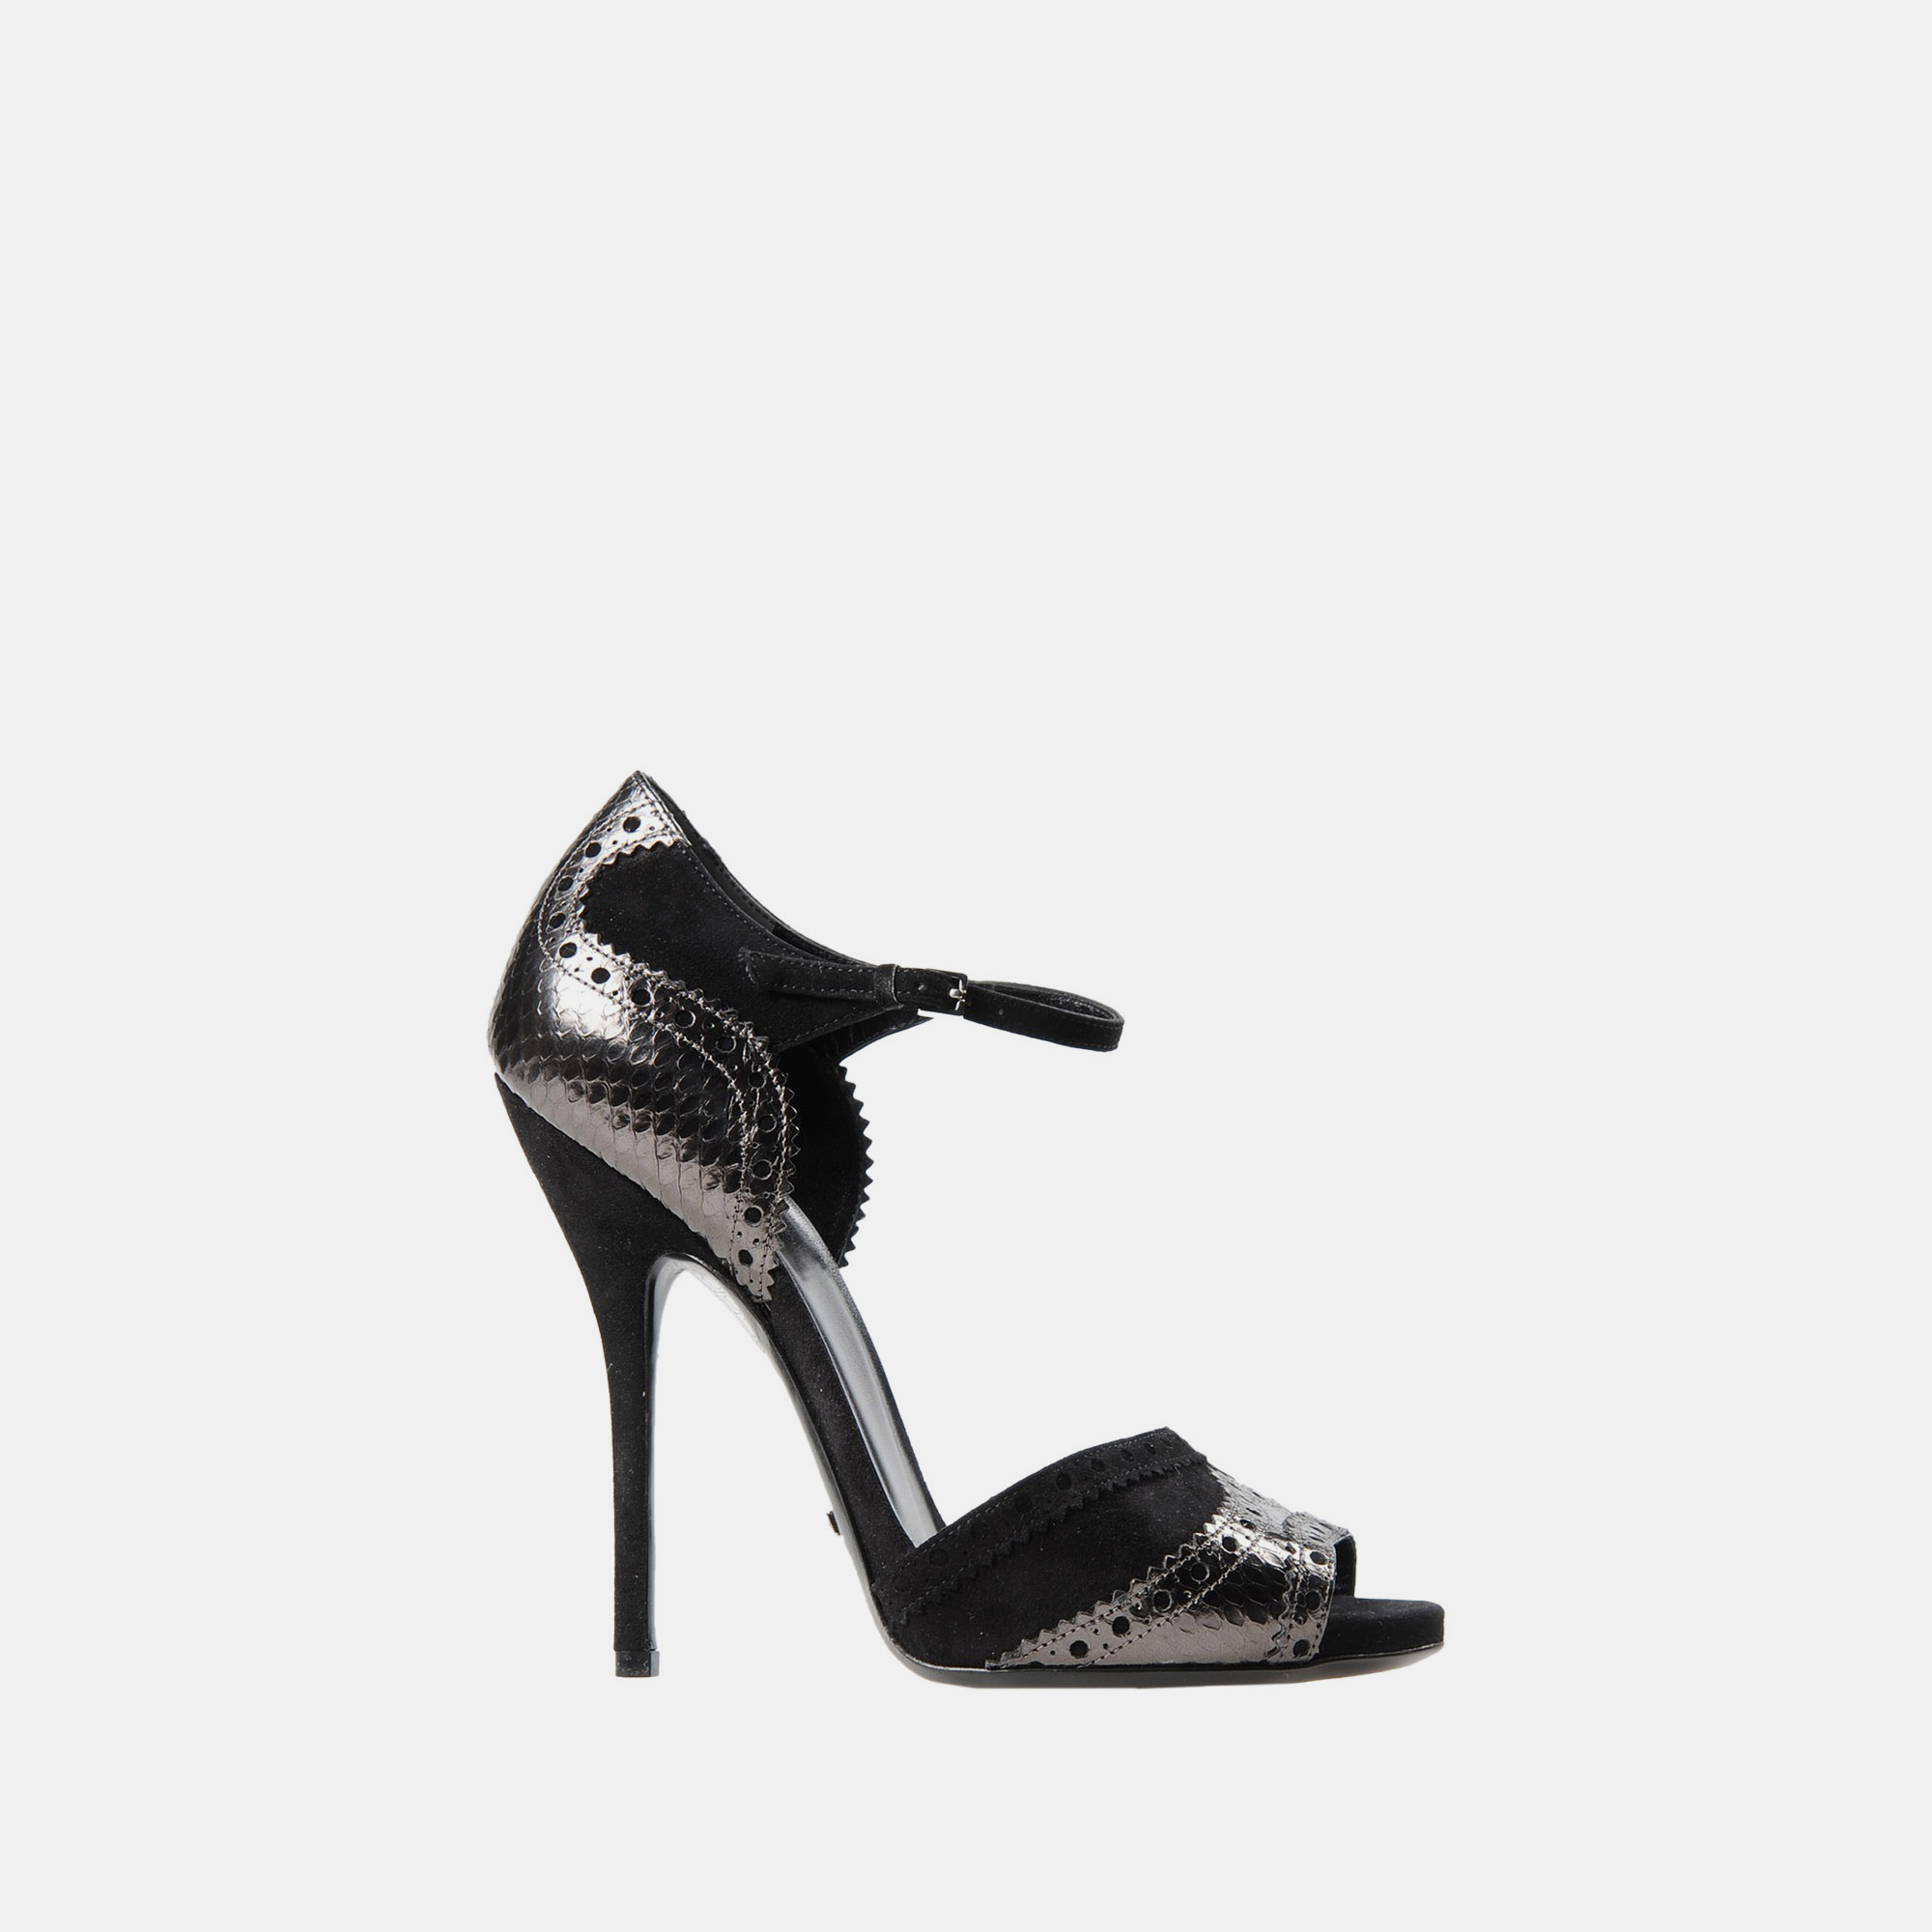 Gucci black/metallic suede and snakeskin ankle strap sandals size 38.5